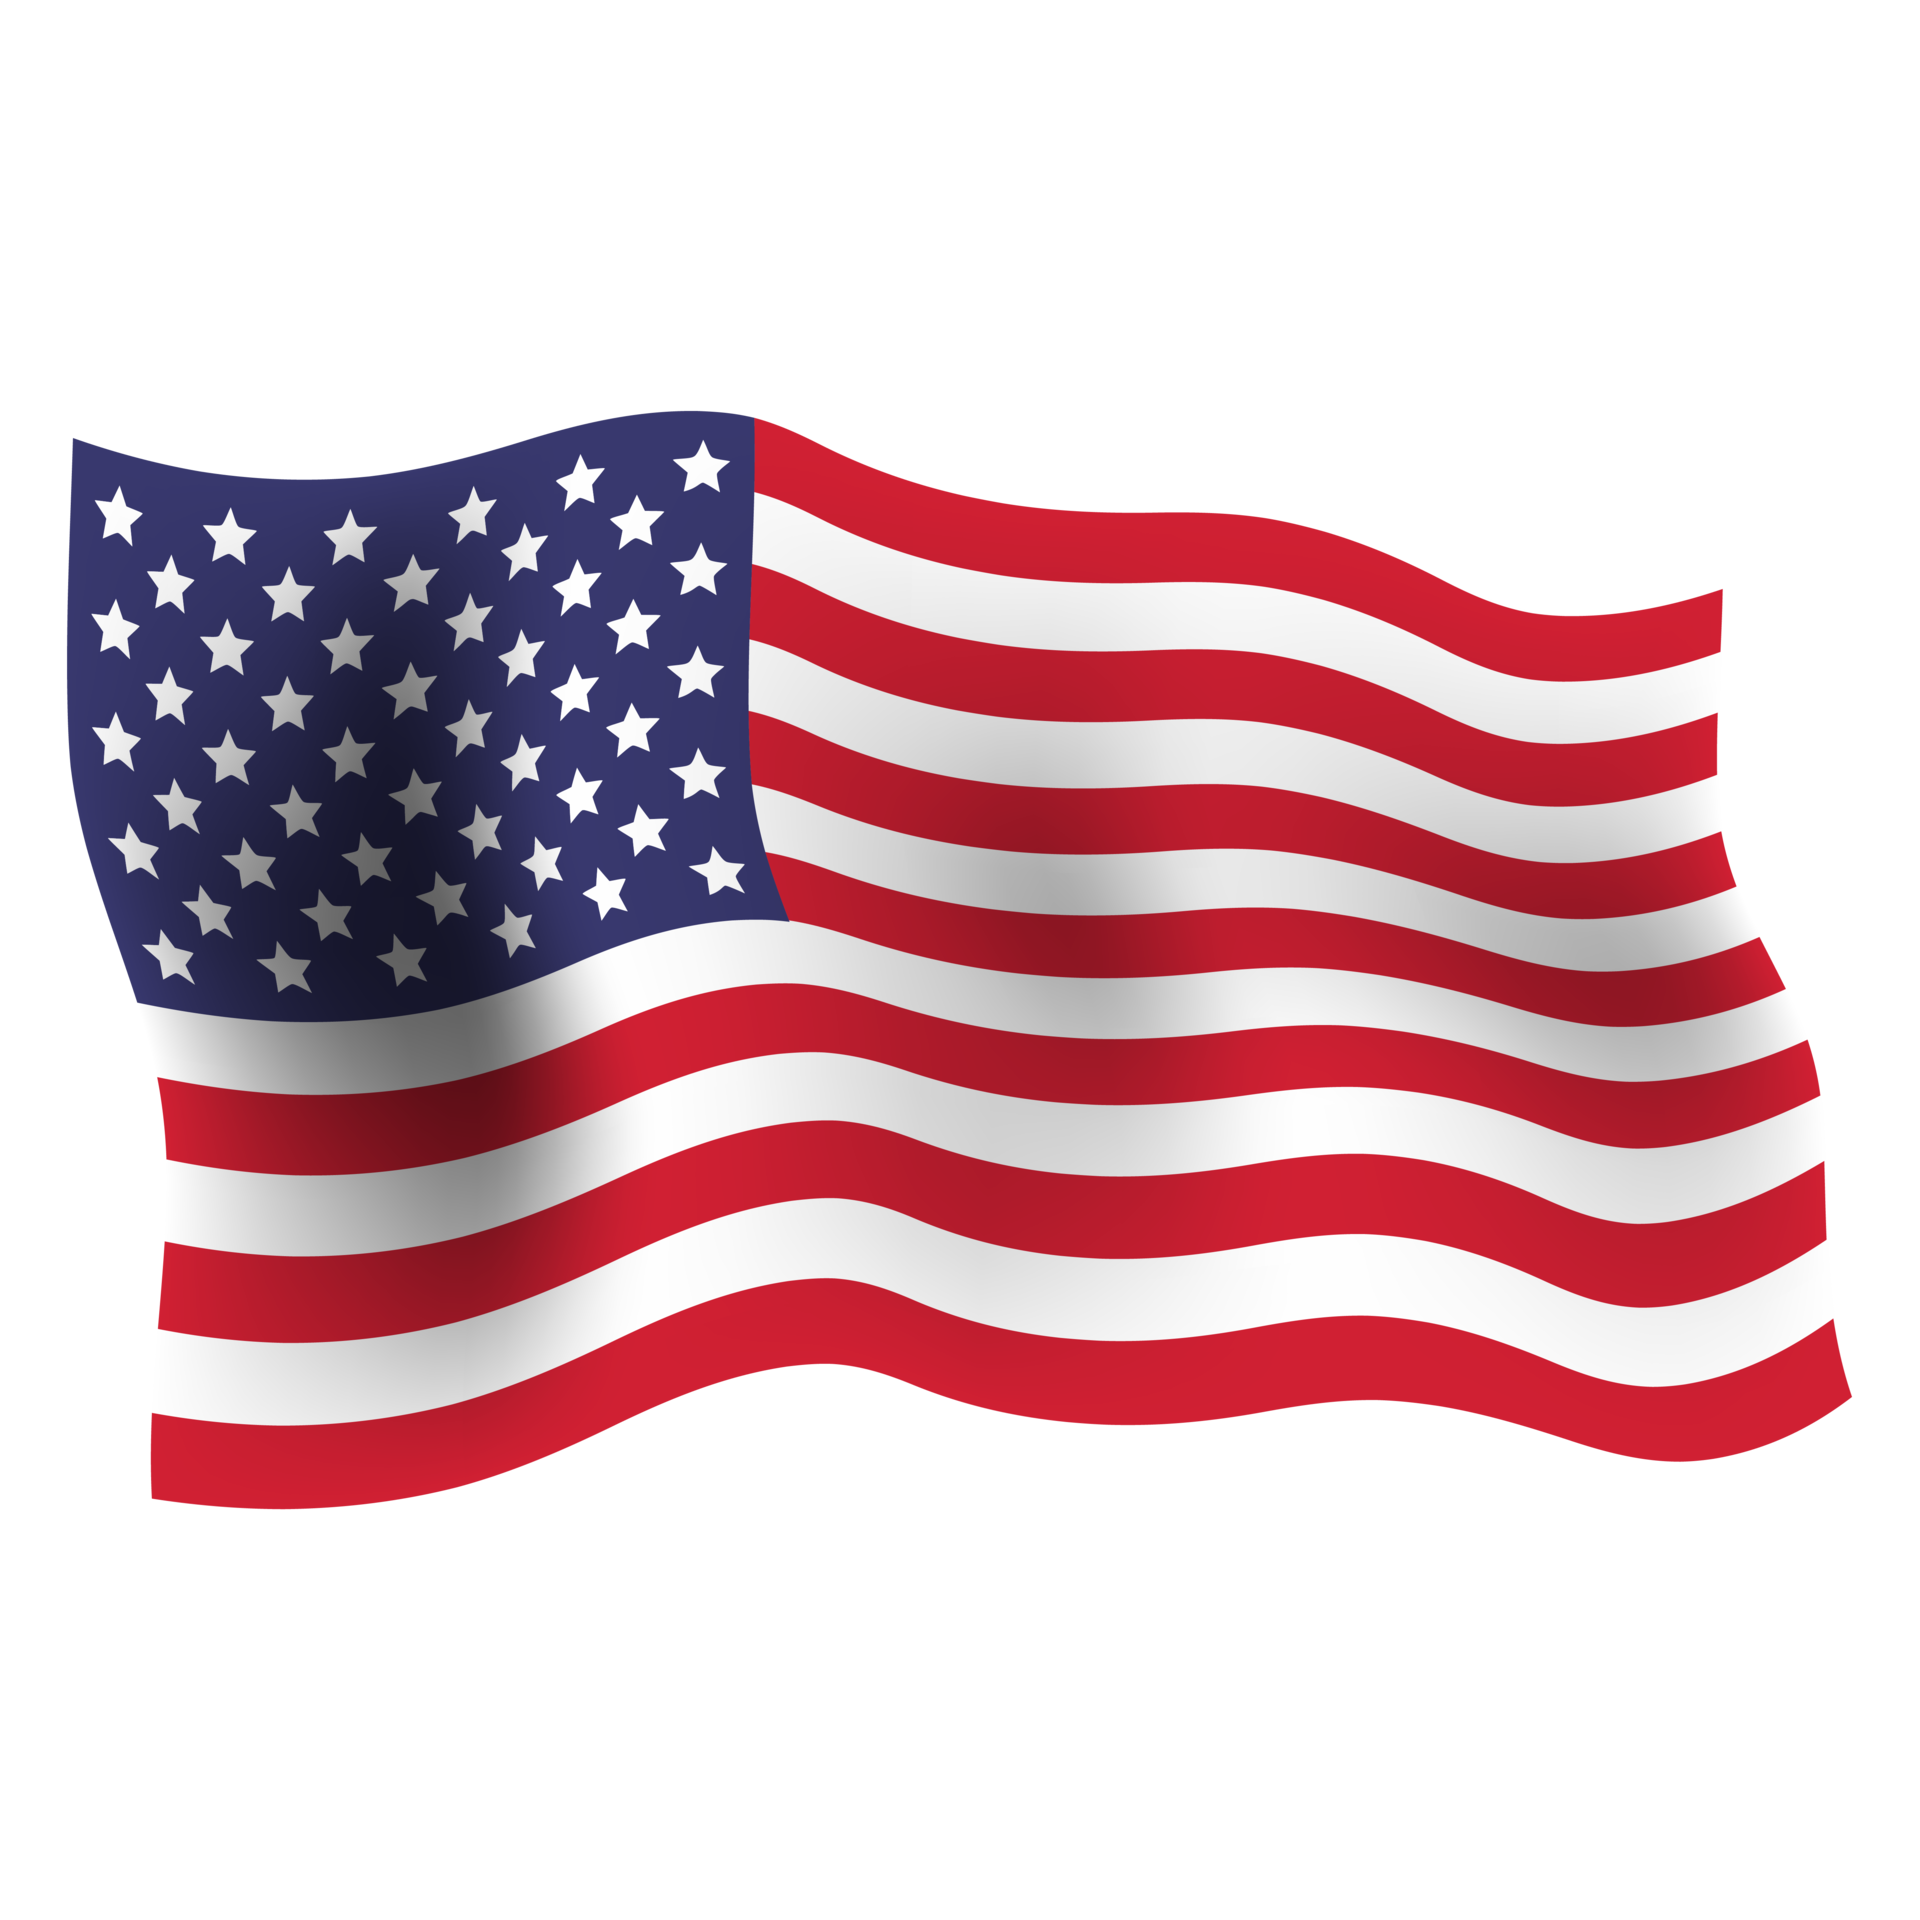 Transparent background american flag png free image png